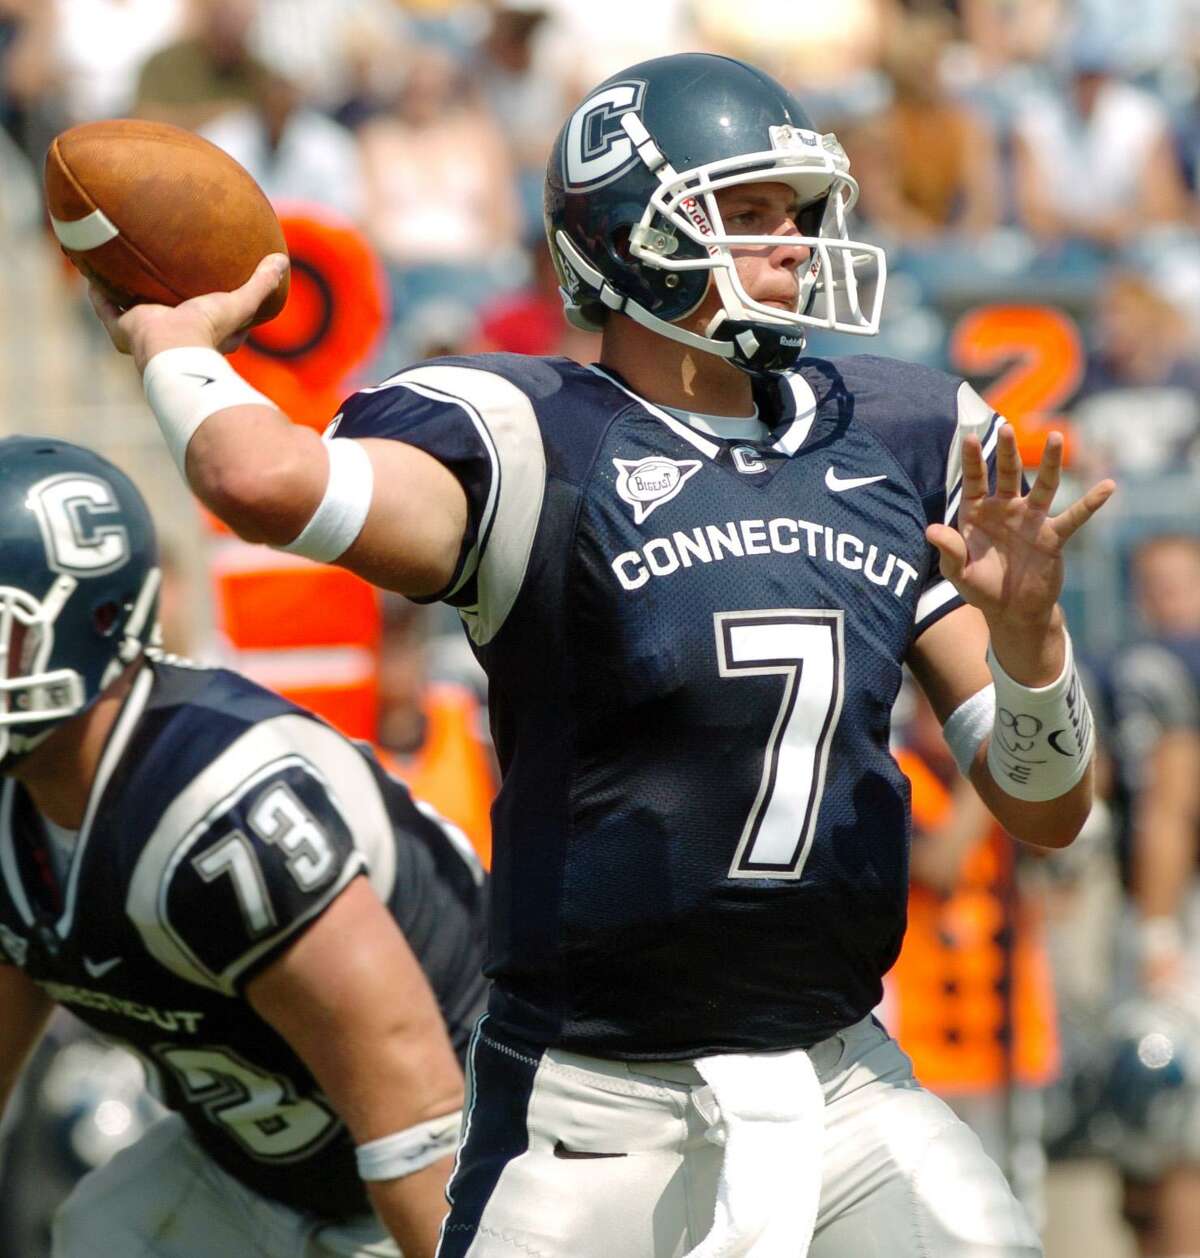 Dan Orlovsky, of Shelton, played quarterback at UConn from 2001-2004 before an NFL career that lasted until 2017.